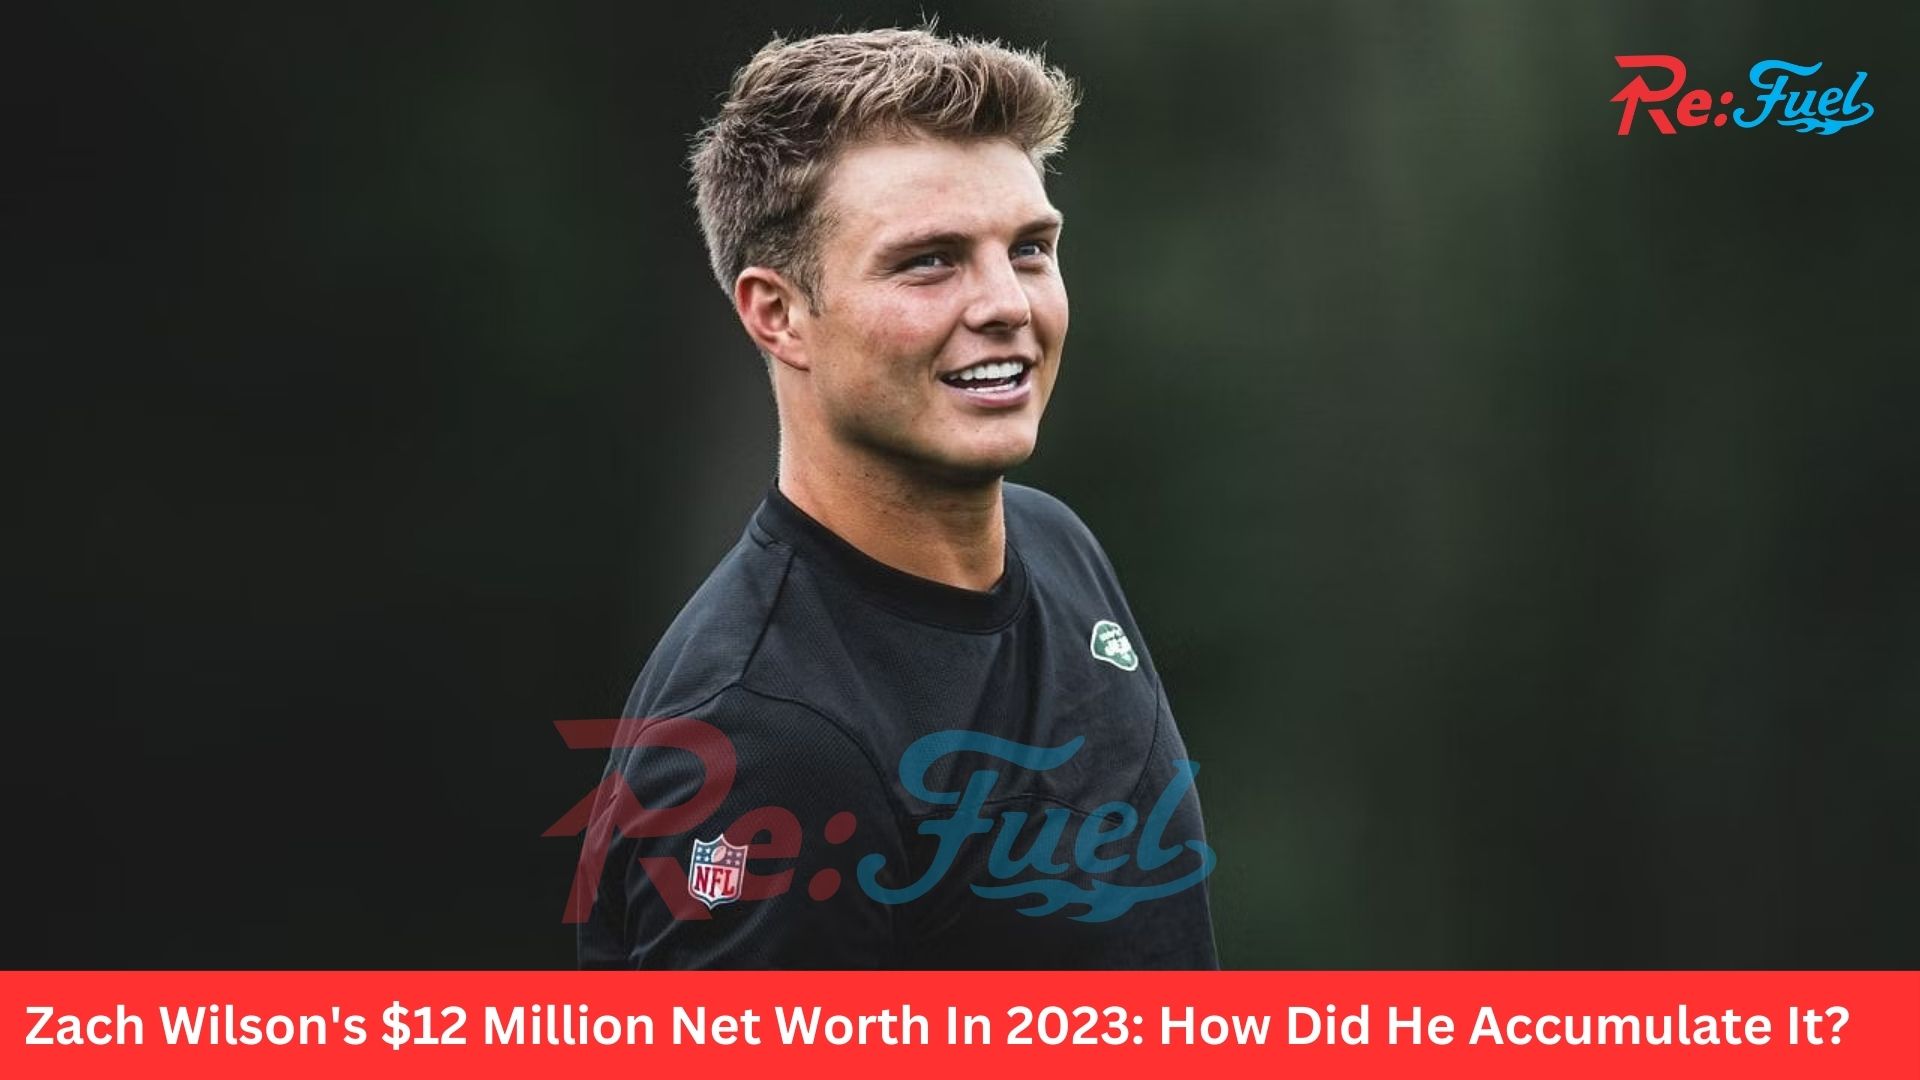 Zach Wilson's $12 Million Net Worth In 2023: How Did He Accumulate It?